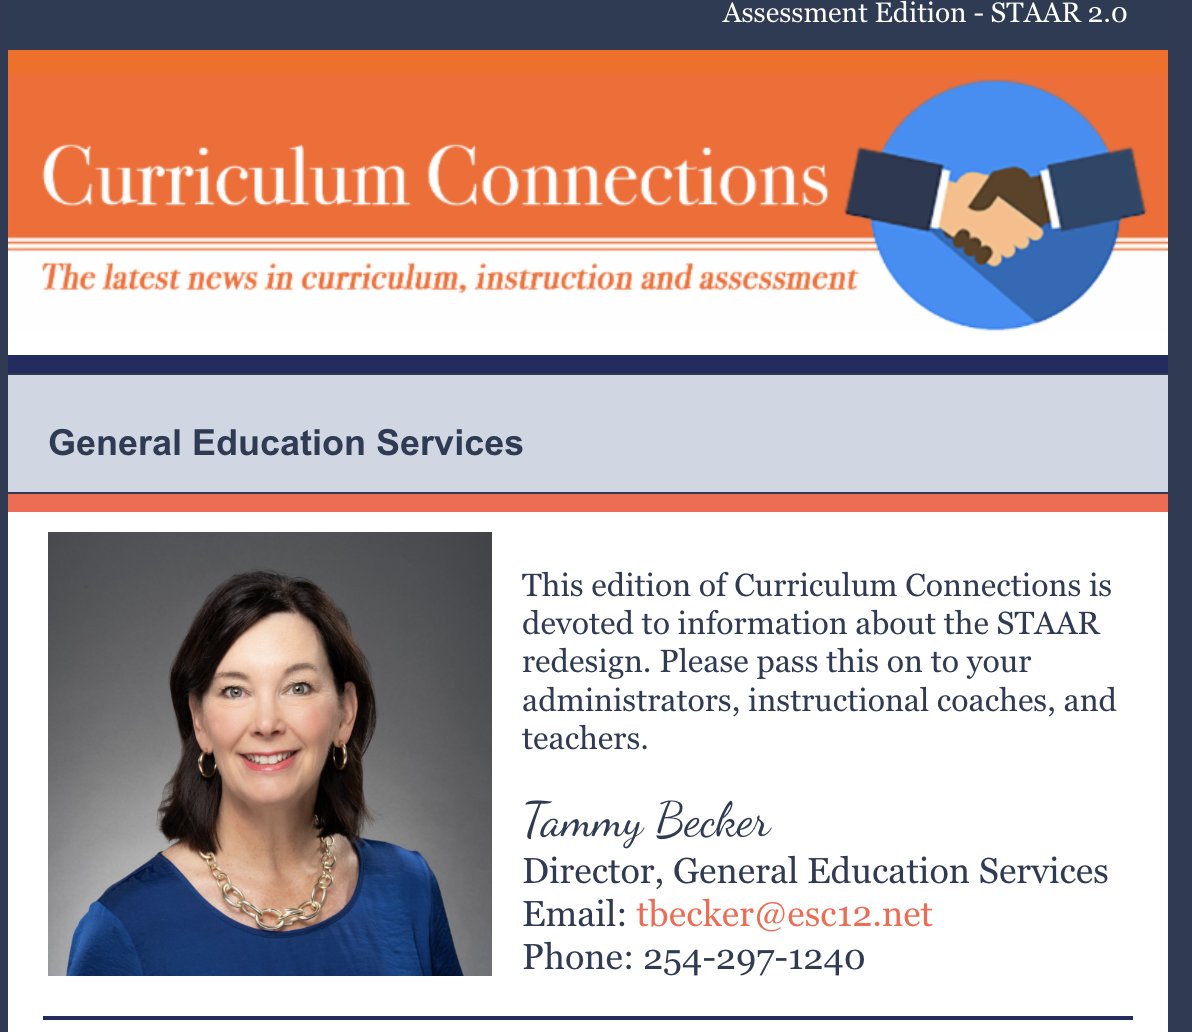 Don't miss this special Assessment Edition of our Curriculum Connections Newsletter! We have included LOTS of important information about the STAAR Redesign. conta.cc/3rJpIvX